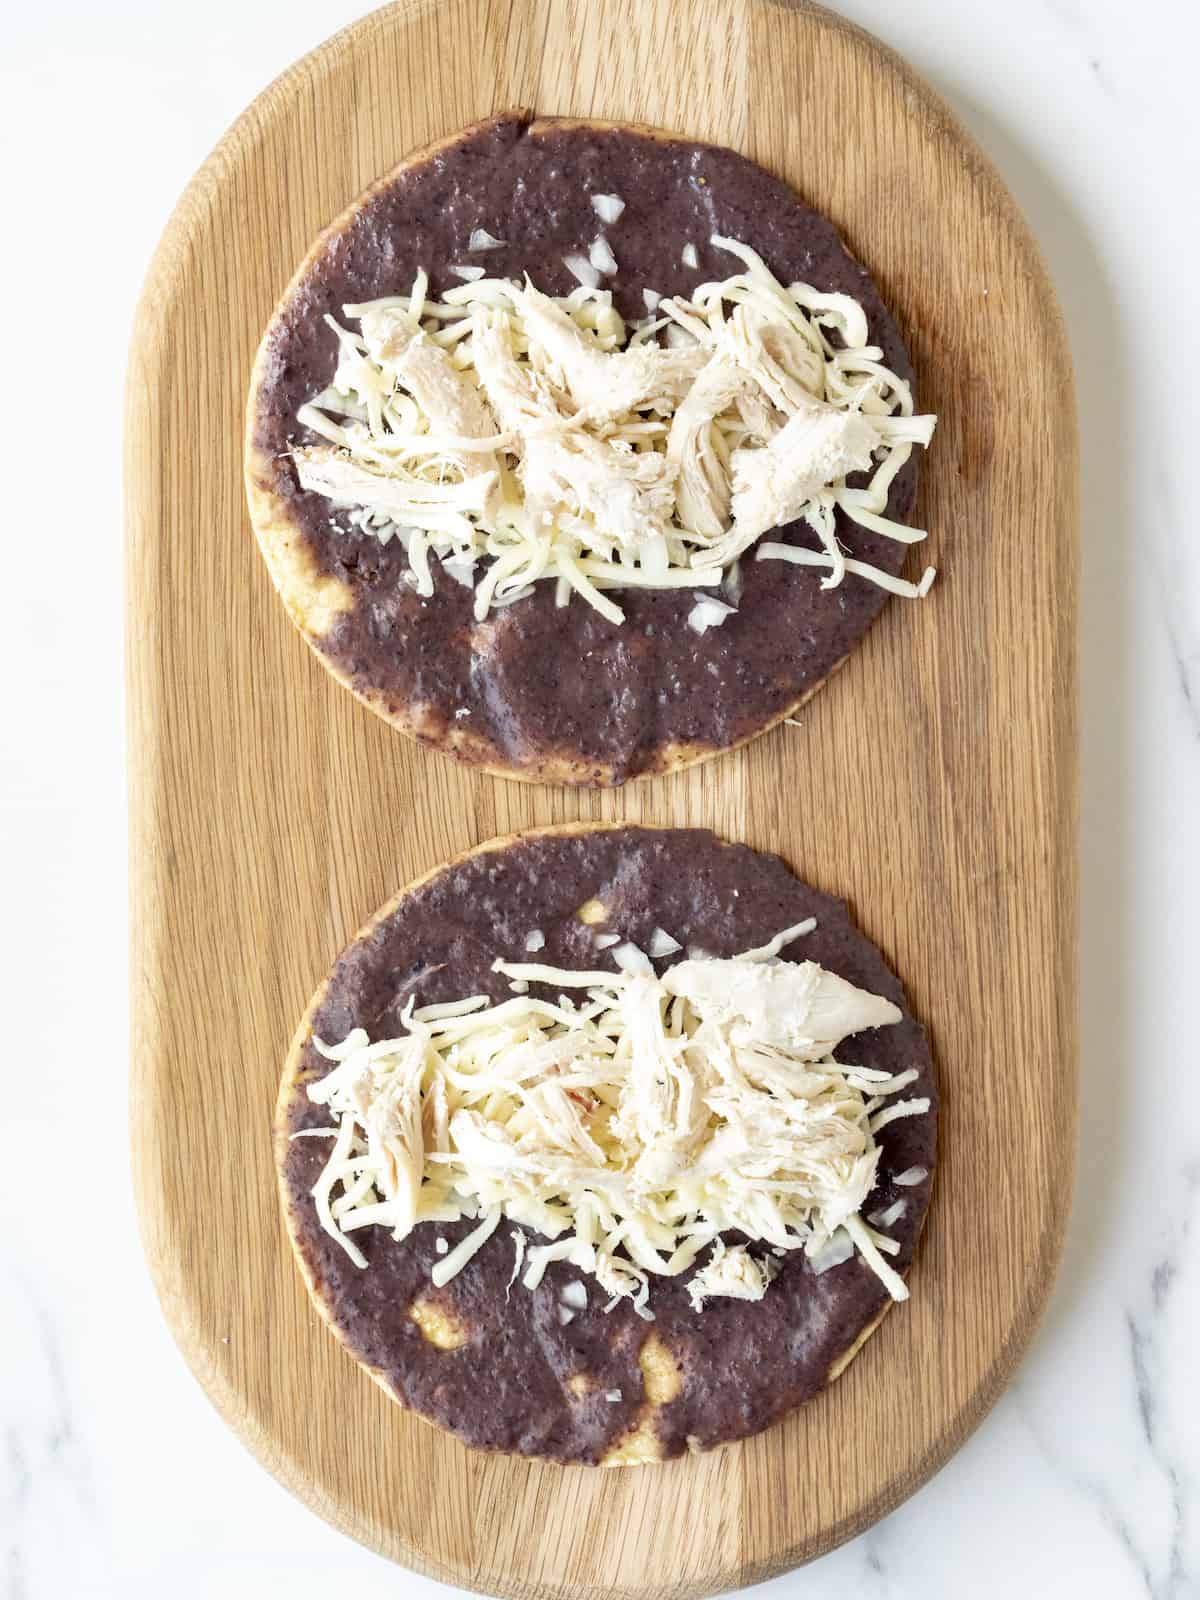 A wooden board with two corn tortillas with black bean puree, shredded chicken and shredded cheese.